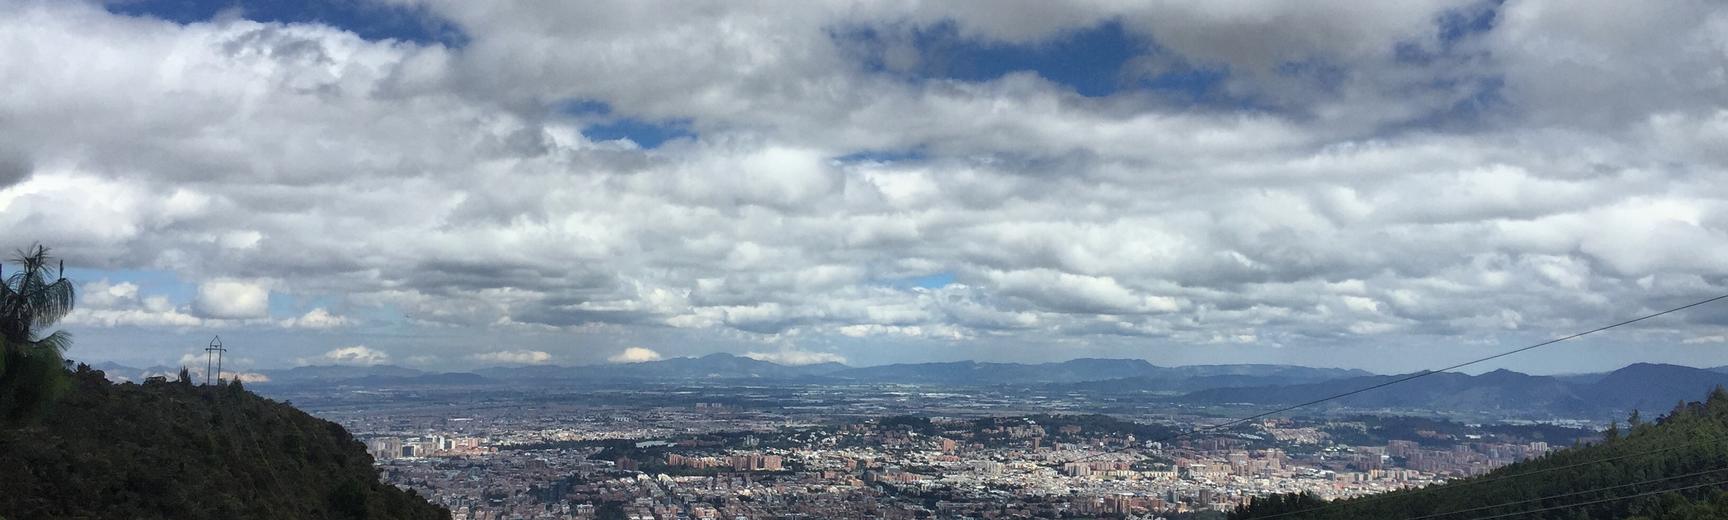 Aerial image of Bogota, Colombia